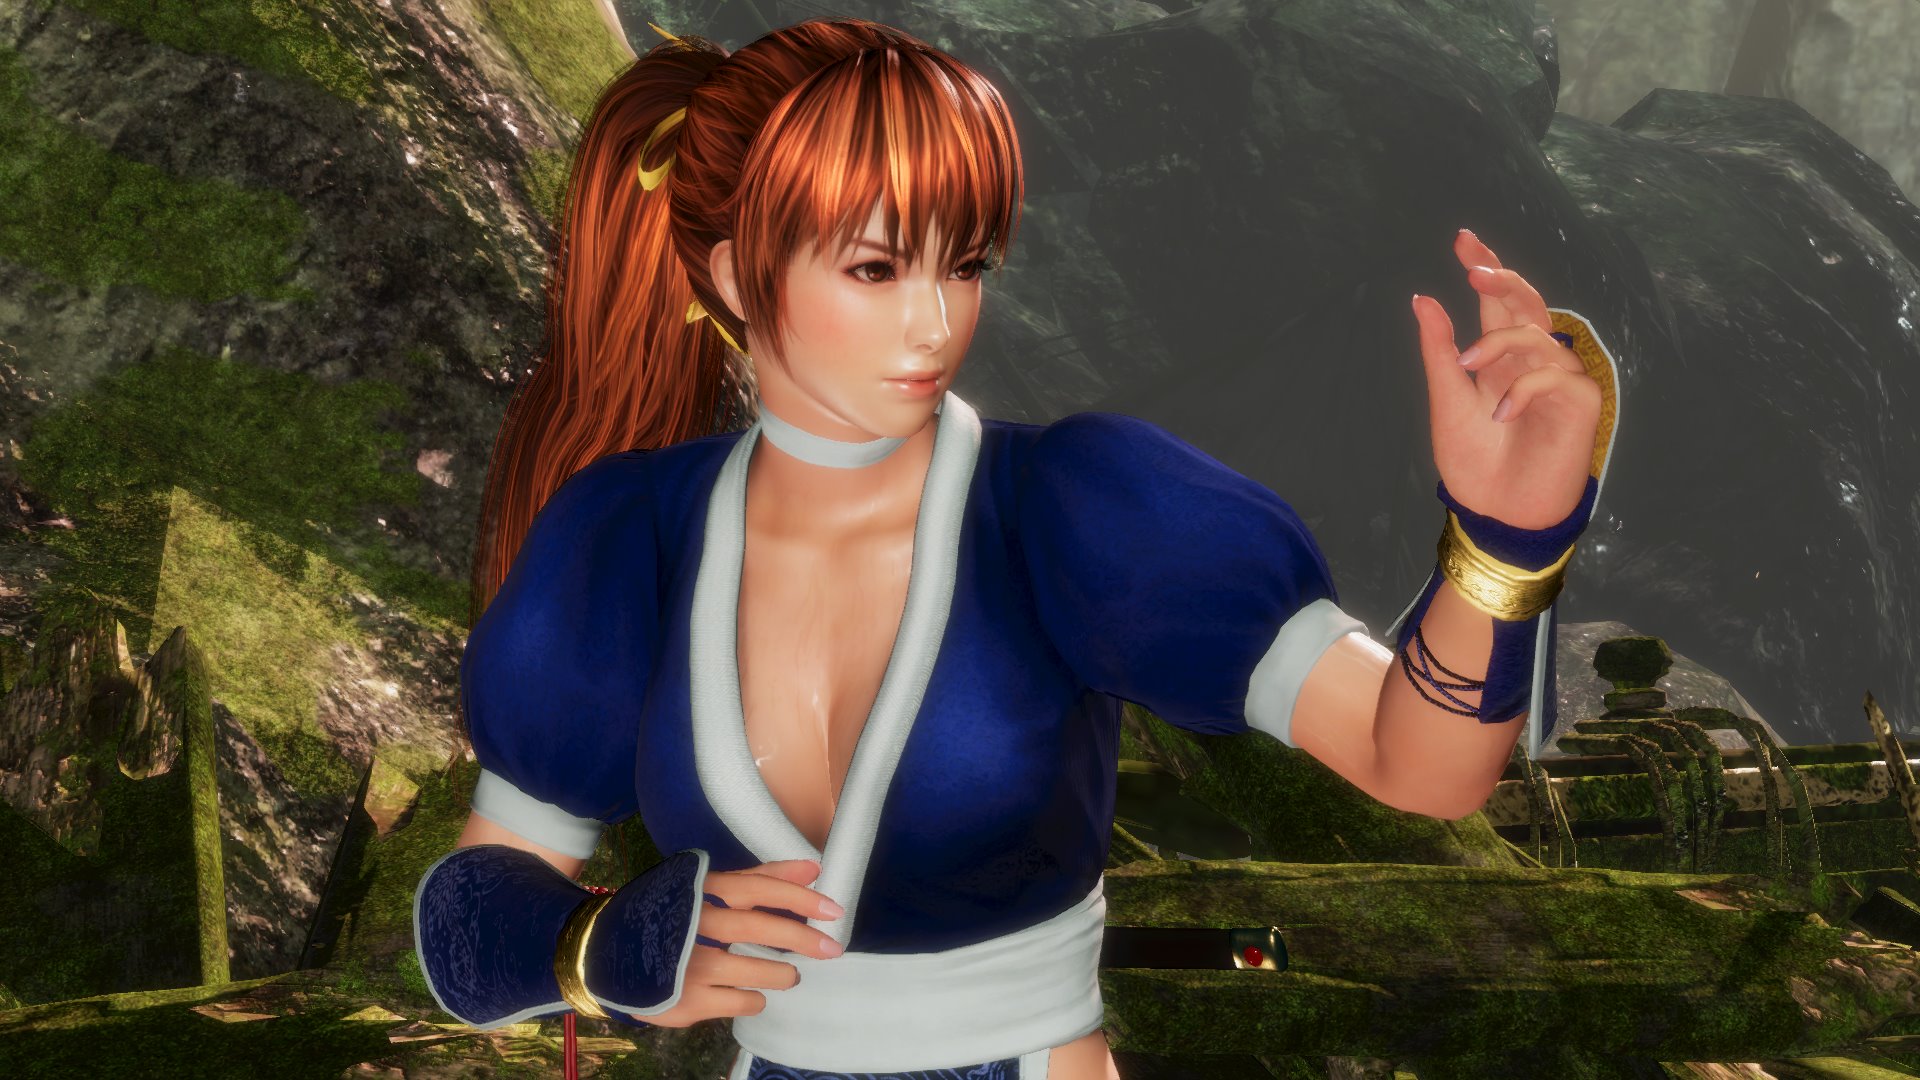 Dead or Alive 6: Core Fighters 1 out of 1 image gallery